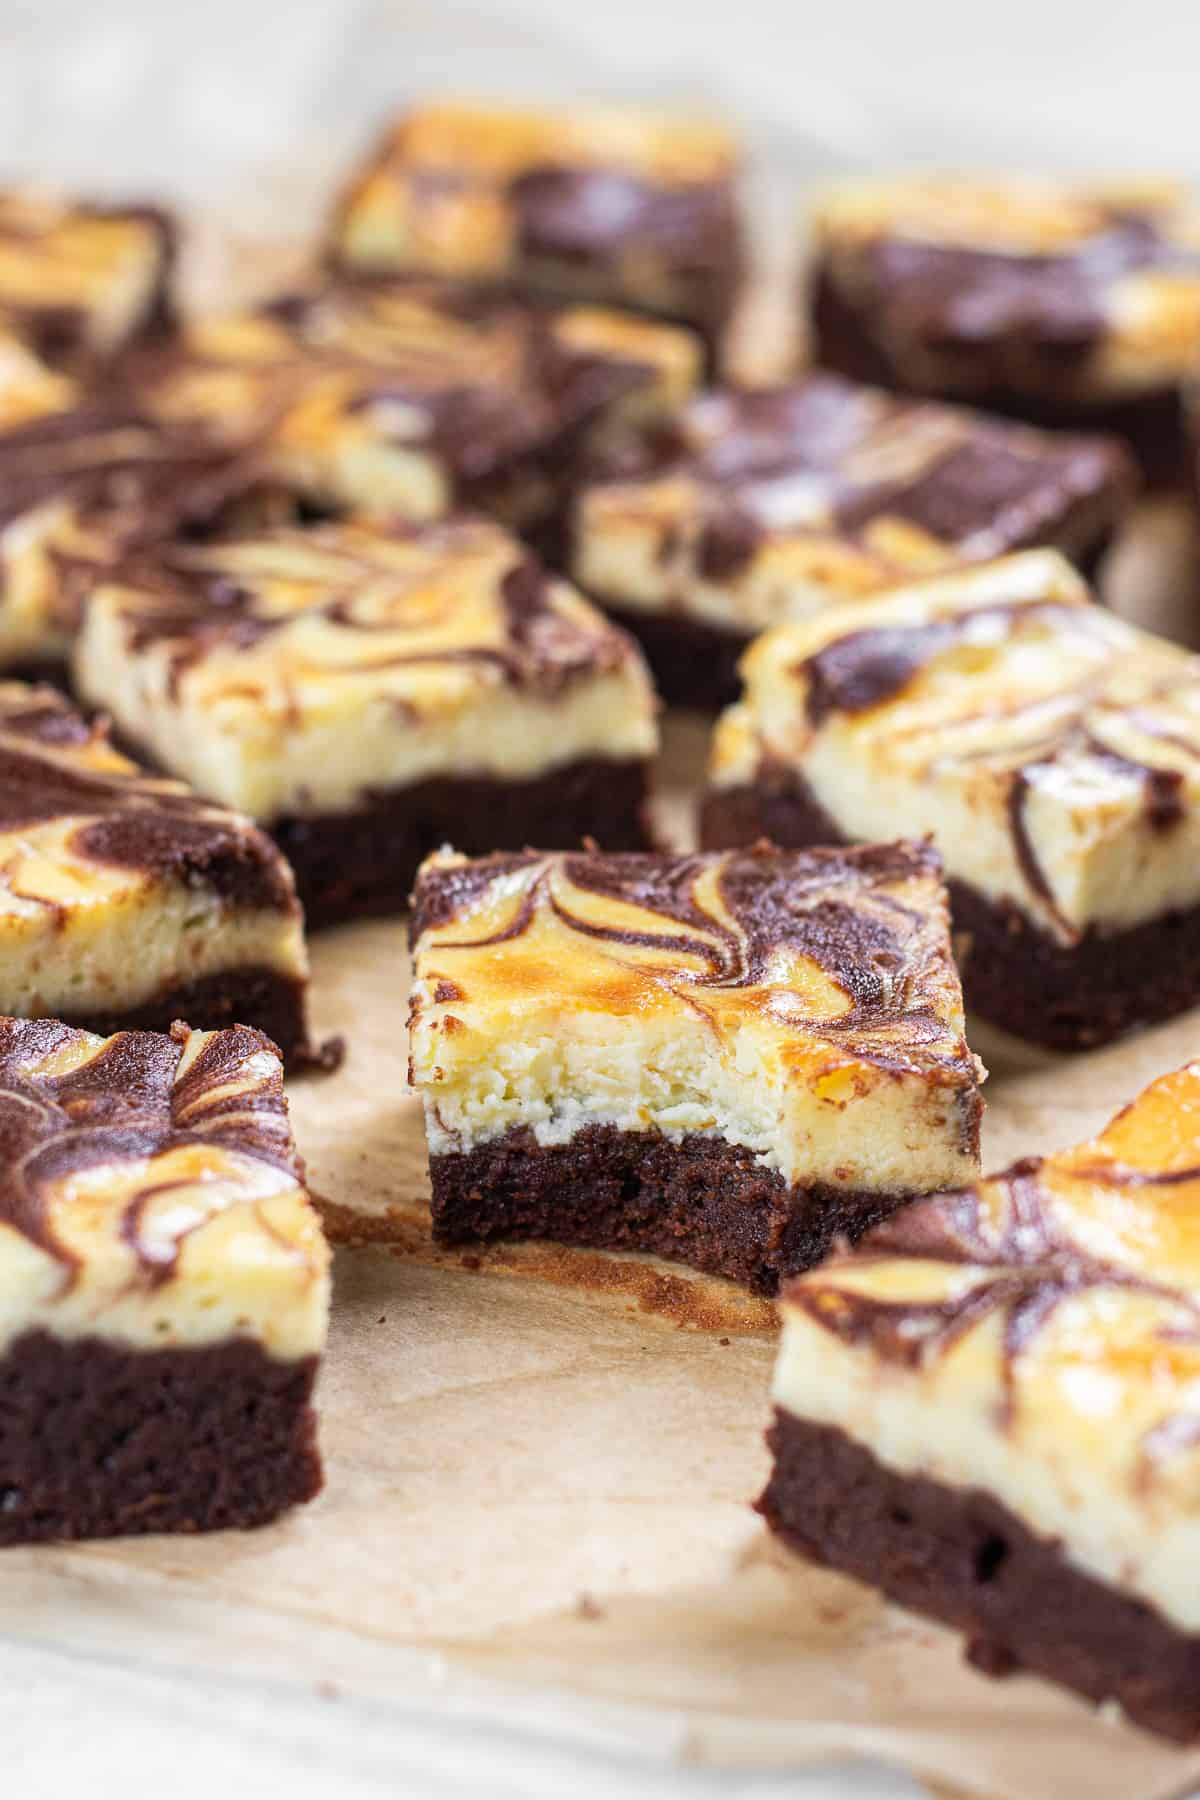 A bite shot of Cheesecake brownies laying on a parchment paper.